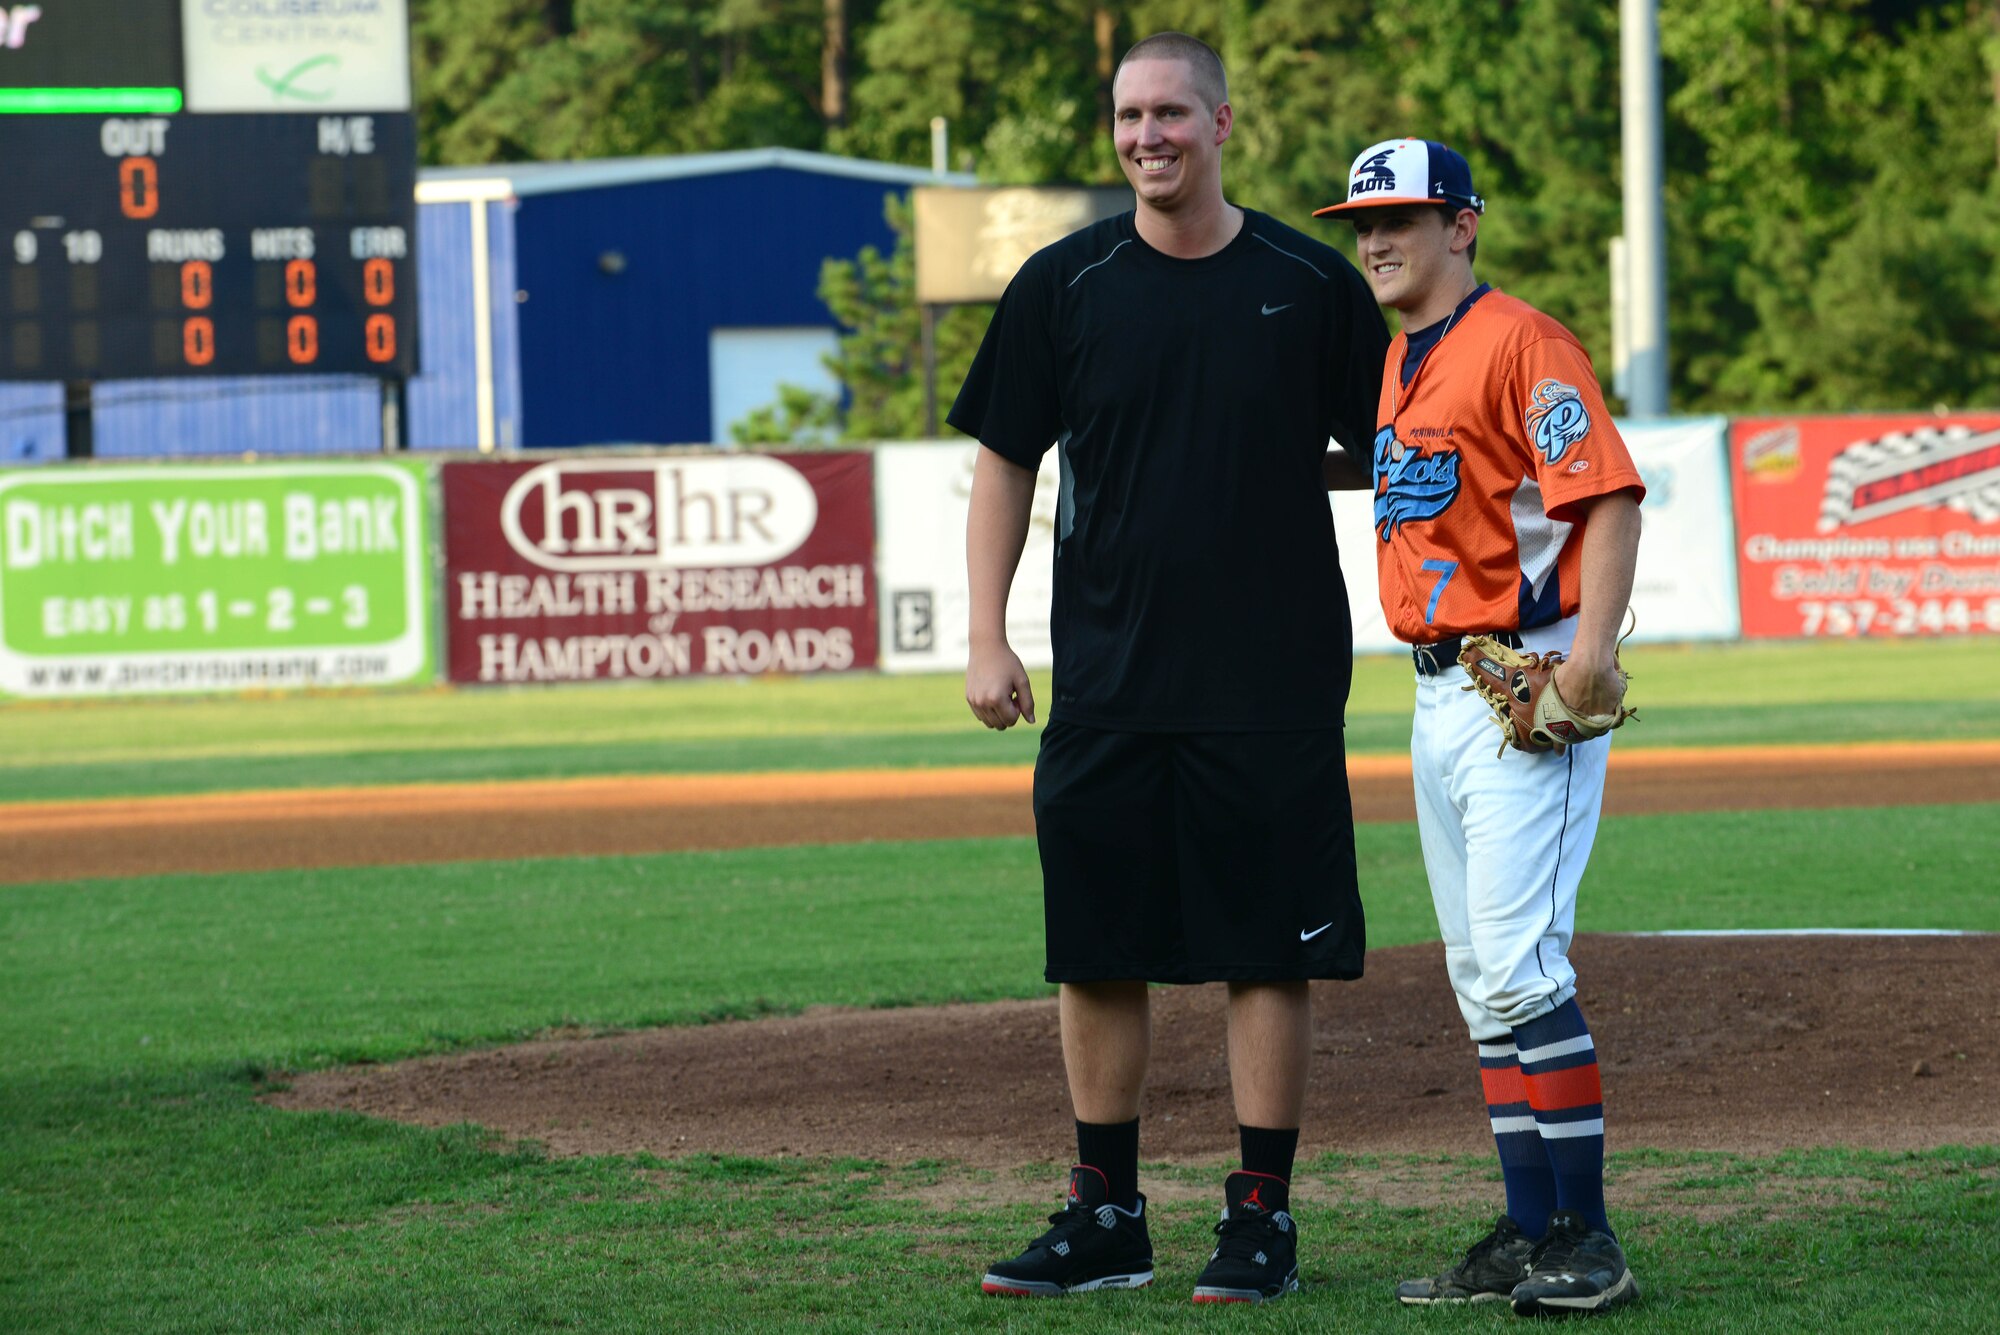 Steve Chambers, left, brother of U.S. Army Sgt. David Chambers who lost his life while on duty Jan. 16, 2013, threw the first pitch during the Peninsula Pilot baseball team’s 2nd Annual Gold Star Family Appreciation Night in Hampton, Va., July 23, 2014. The Gold Star Family program holds events such as Thanksgiving meals and mother’s day activities. (U.S. Air Force photo by Airman 1st Class Kimberly Nagle/Released)